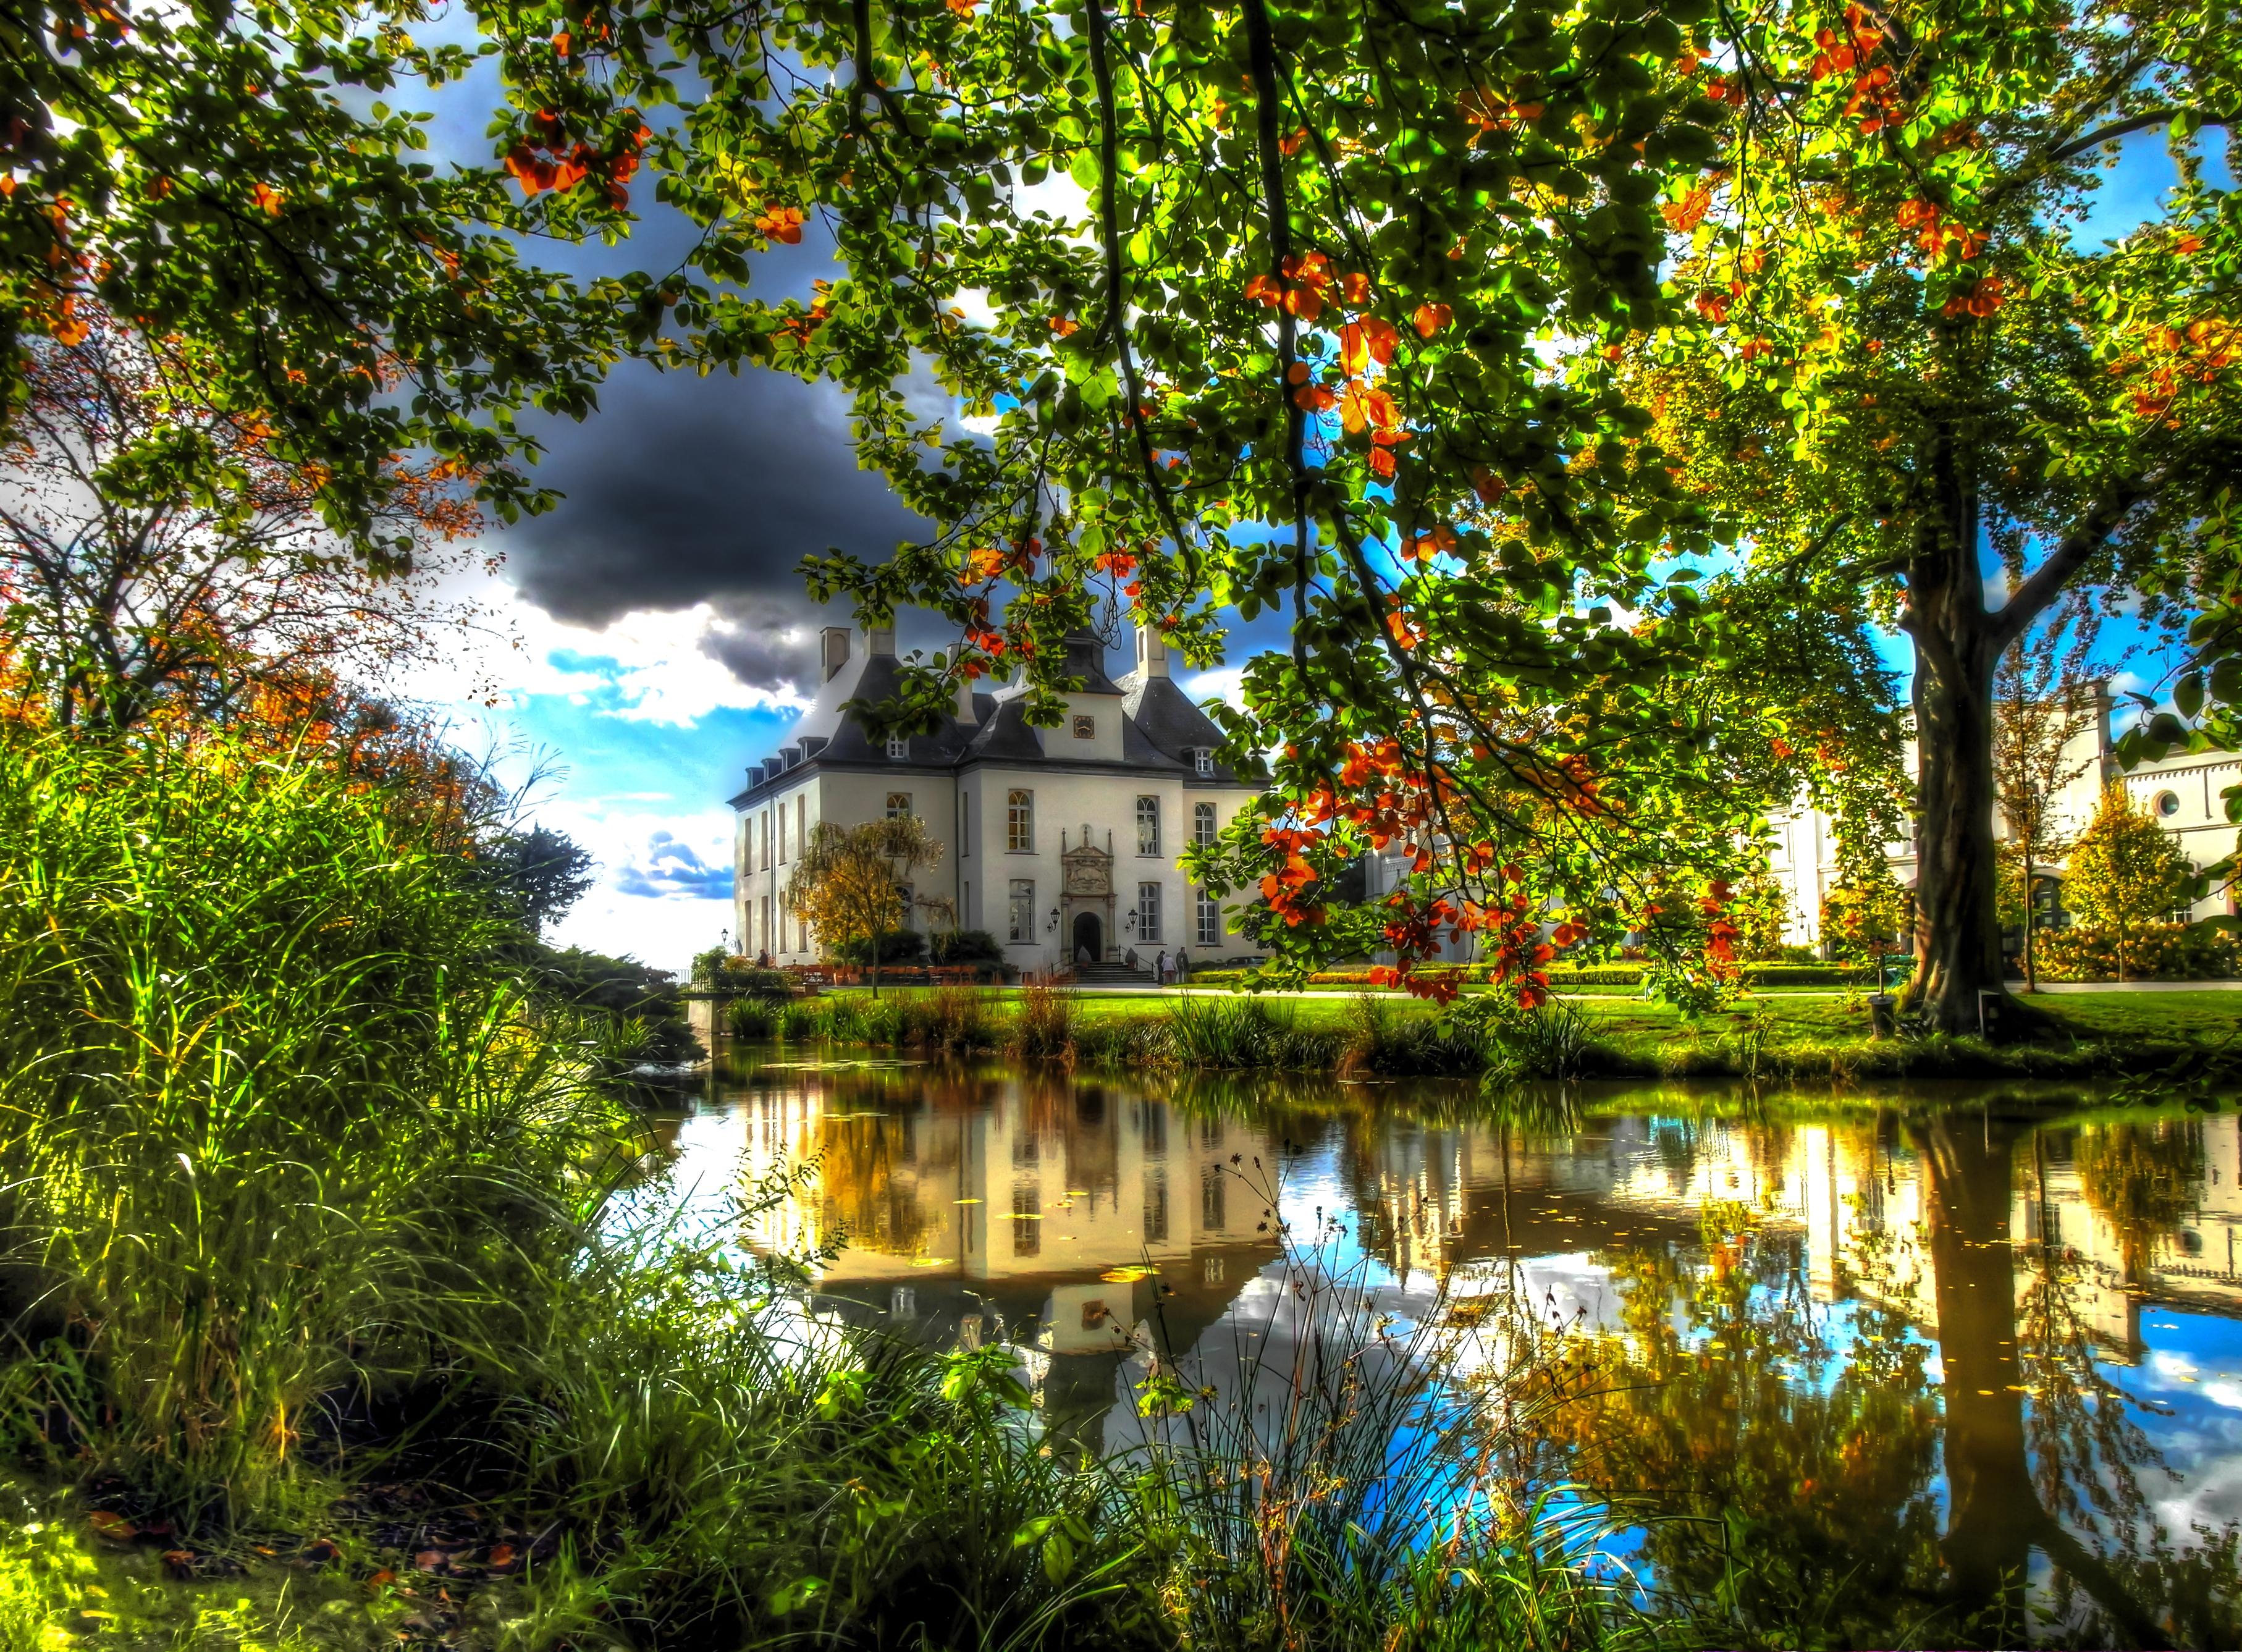 Download 3629x2674 Big House, River, Water Reflection, Like